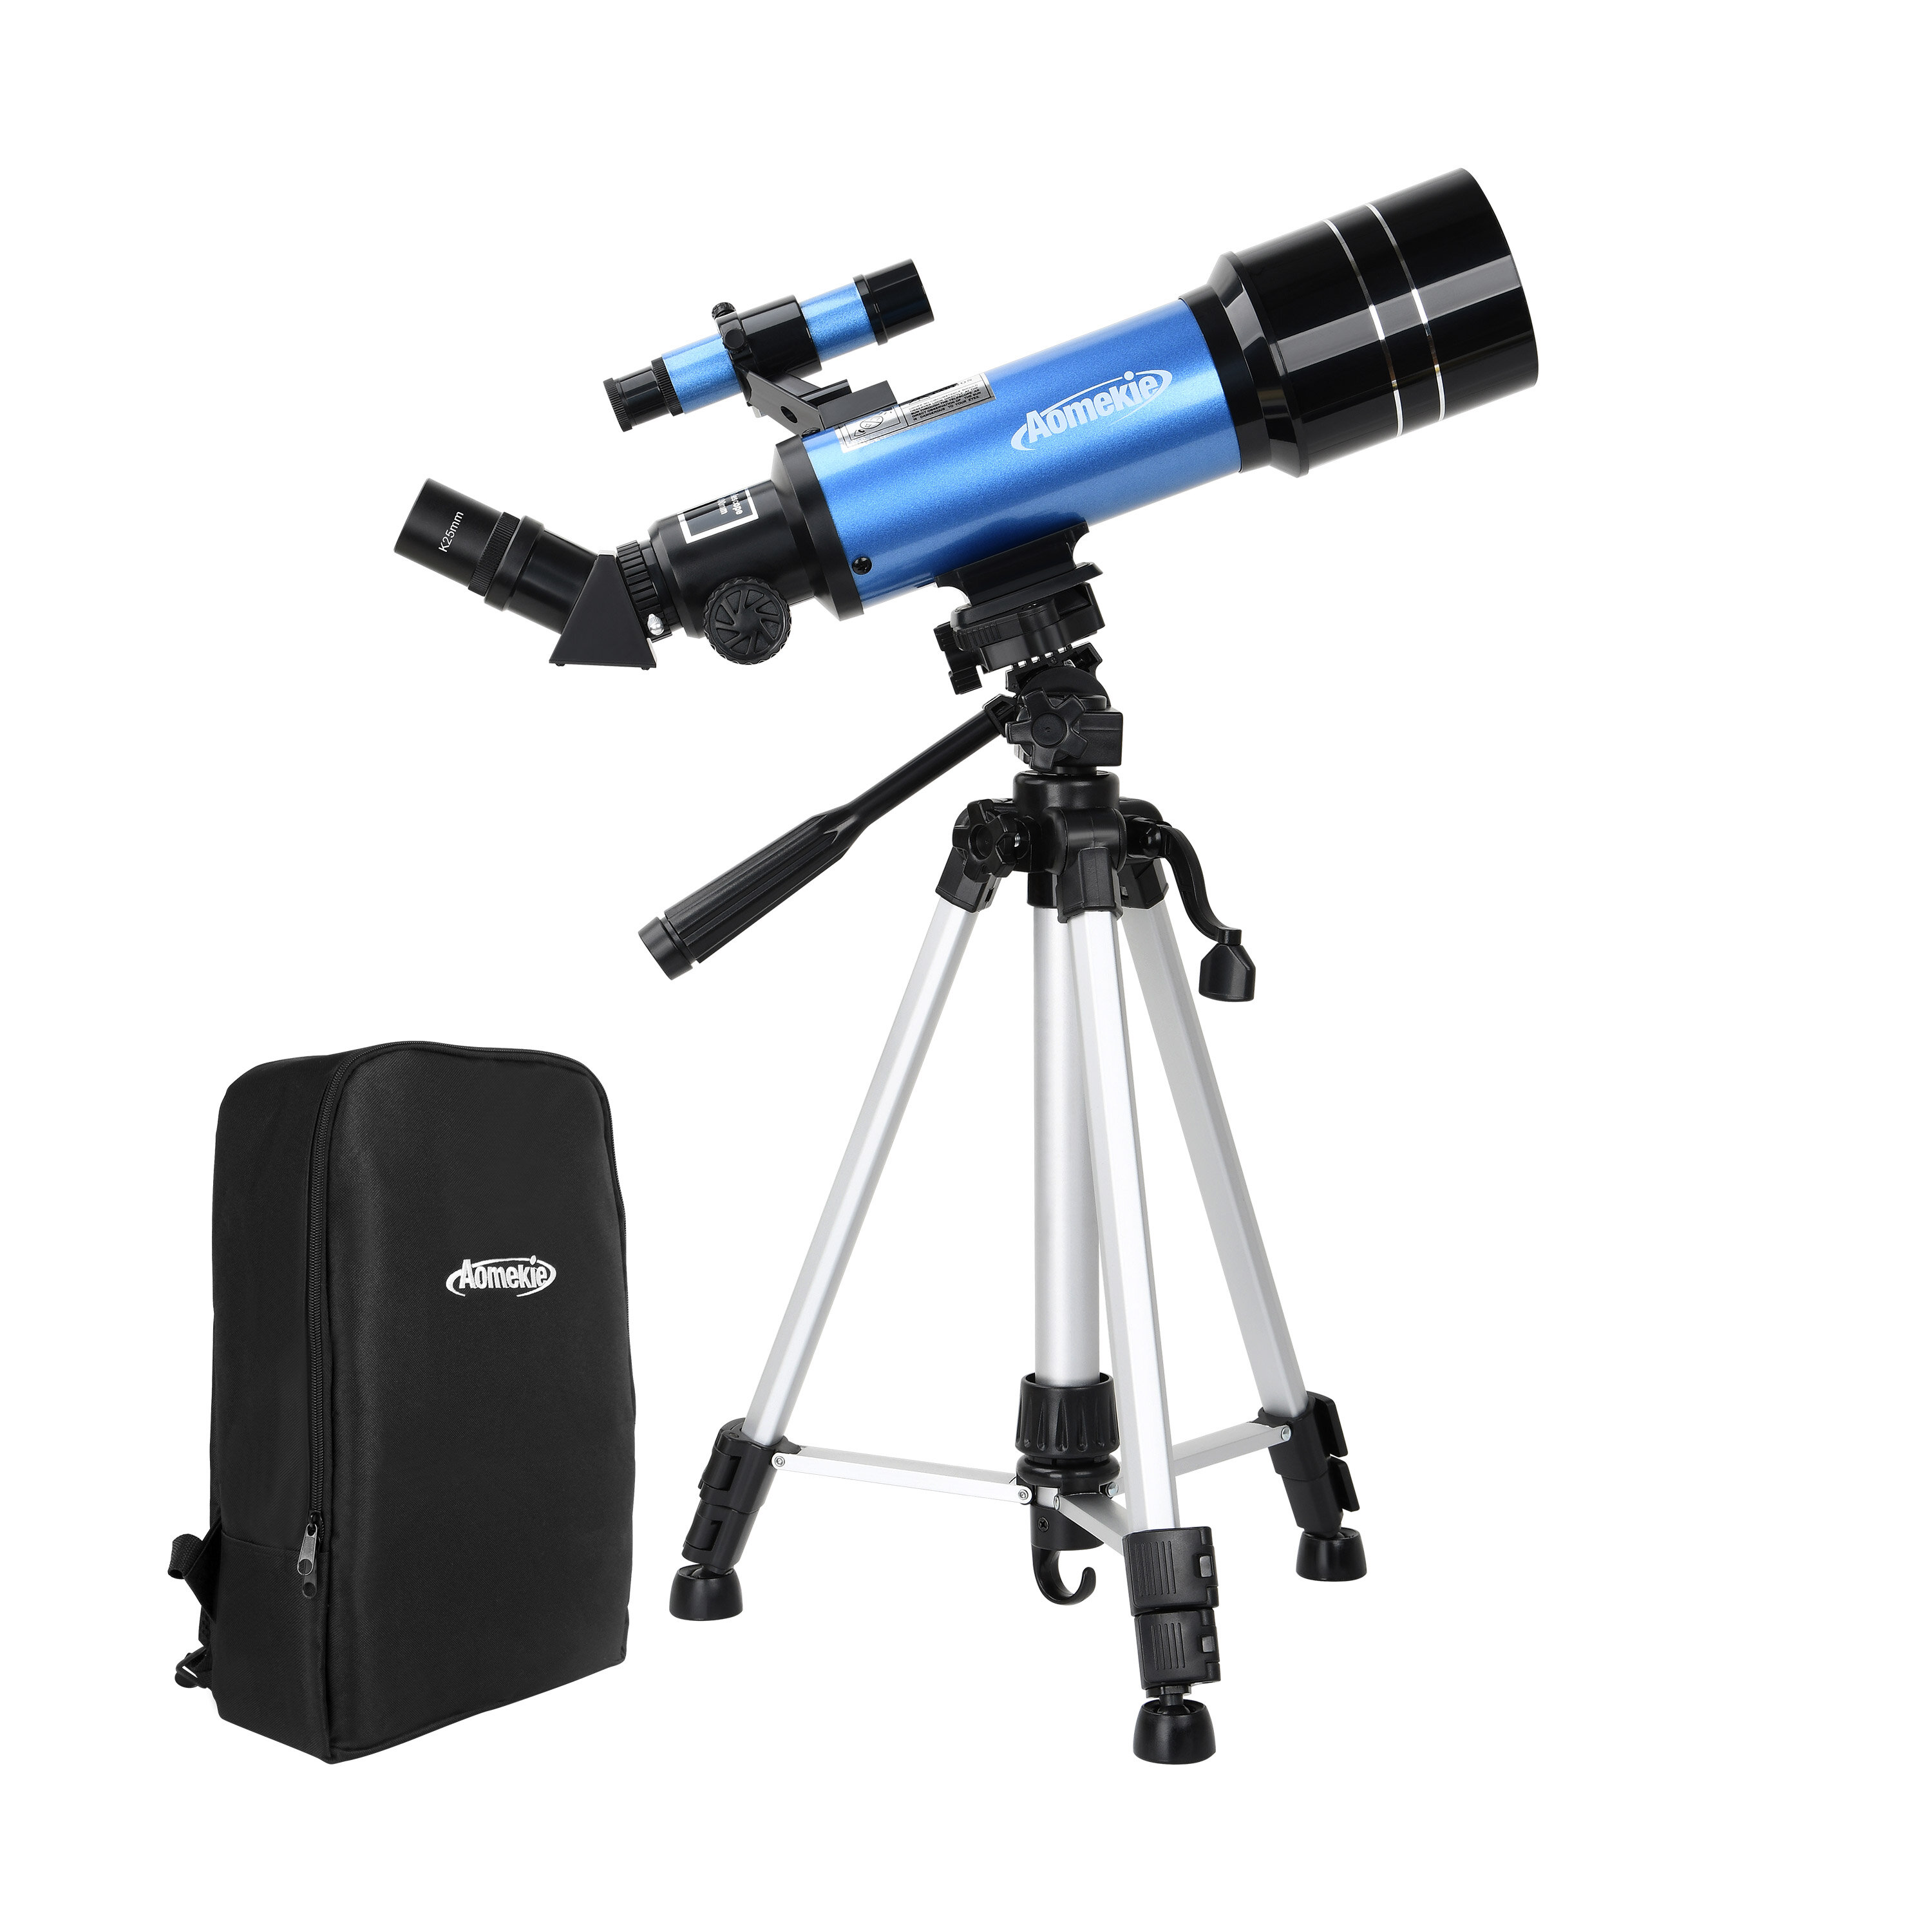 

[US Direct] AOMEKIE AO2002 400/70mm Refractor Adult Astronomical Telescope with Phone Adapter Adjustable Tripod and Find